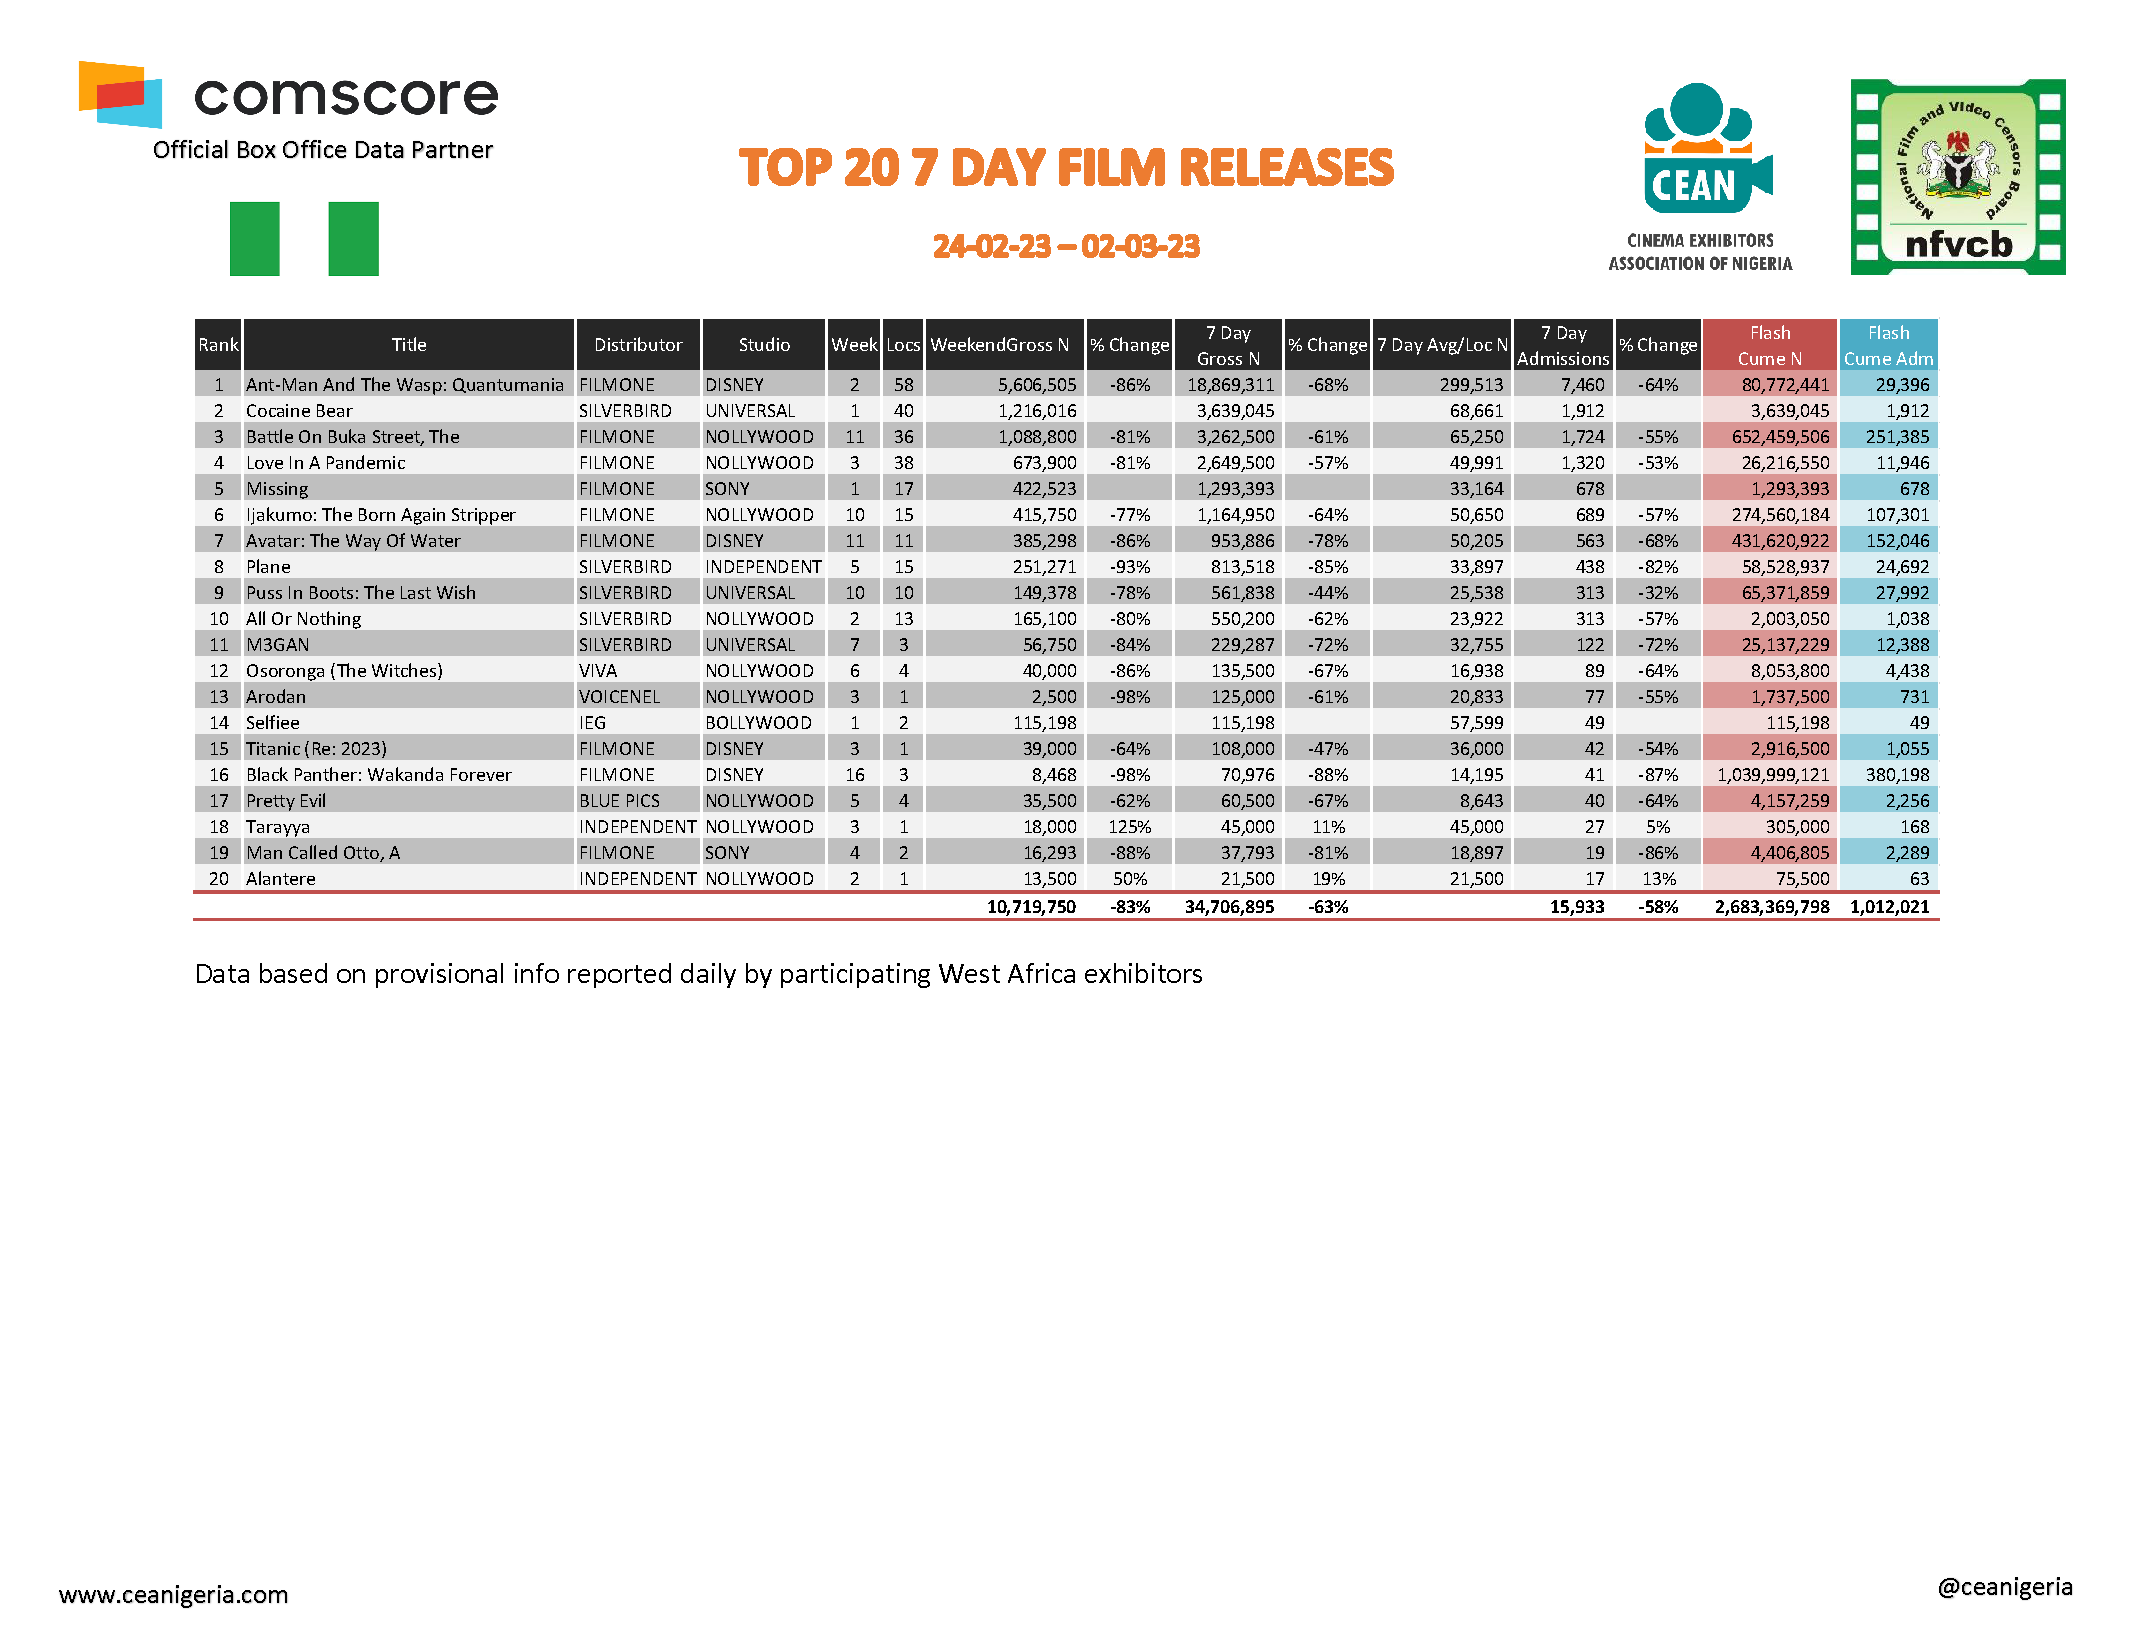 Top 20 films 7 Day 24th February 2nd March